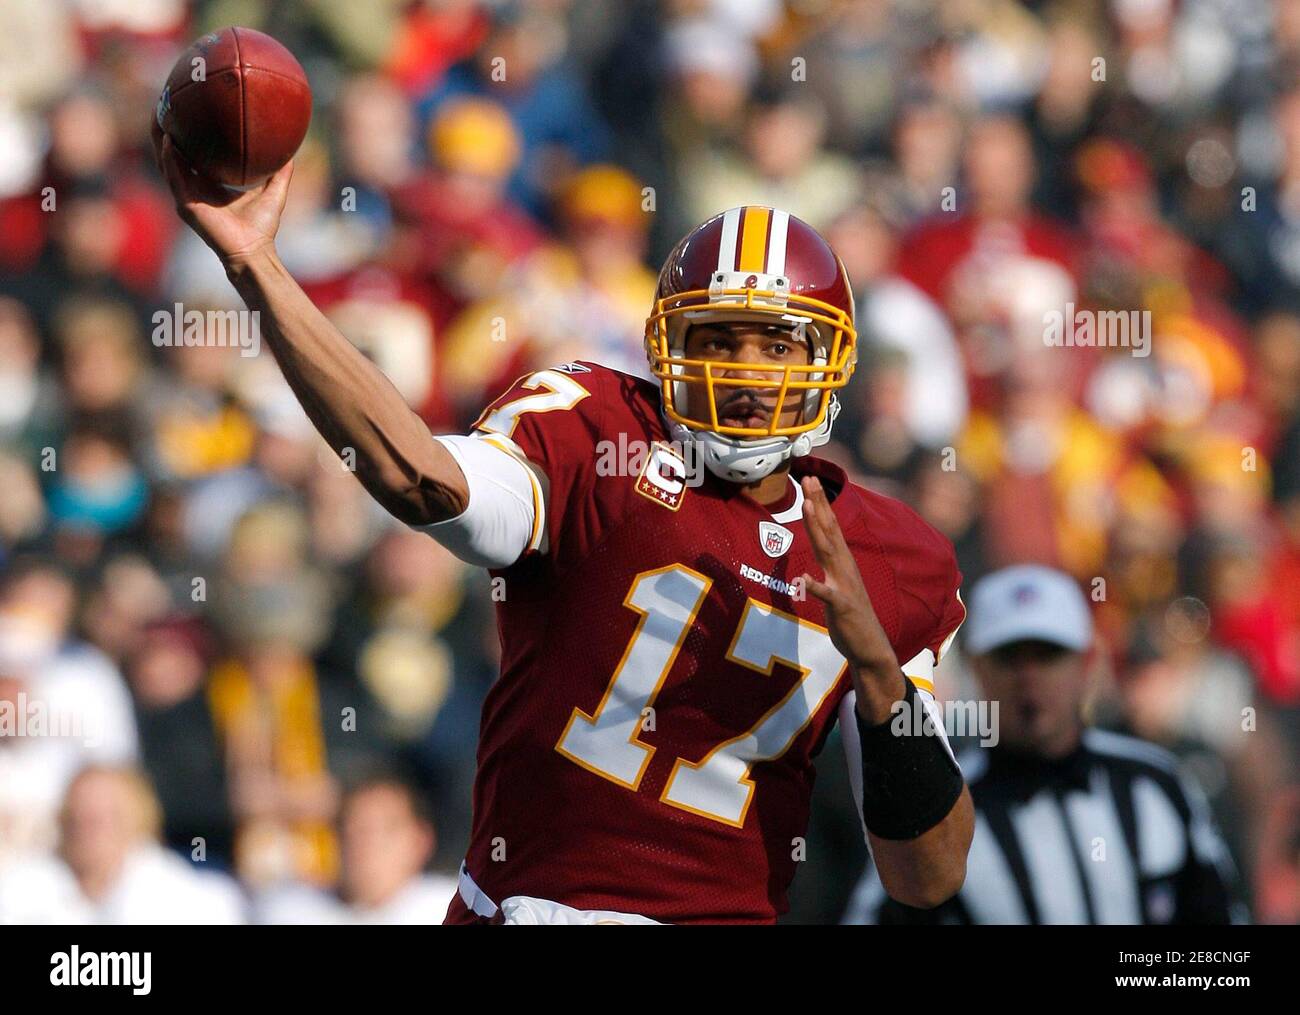 Washington Redskins quarterback Jason Campbell throws in the first half against the New Orleans Saints in their NFL football game in Landover December 6, 2009. REUTERS/Gary Cameron (UNITED STATES SPORT FOOTBALL) Stock Photo